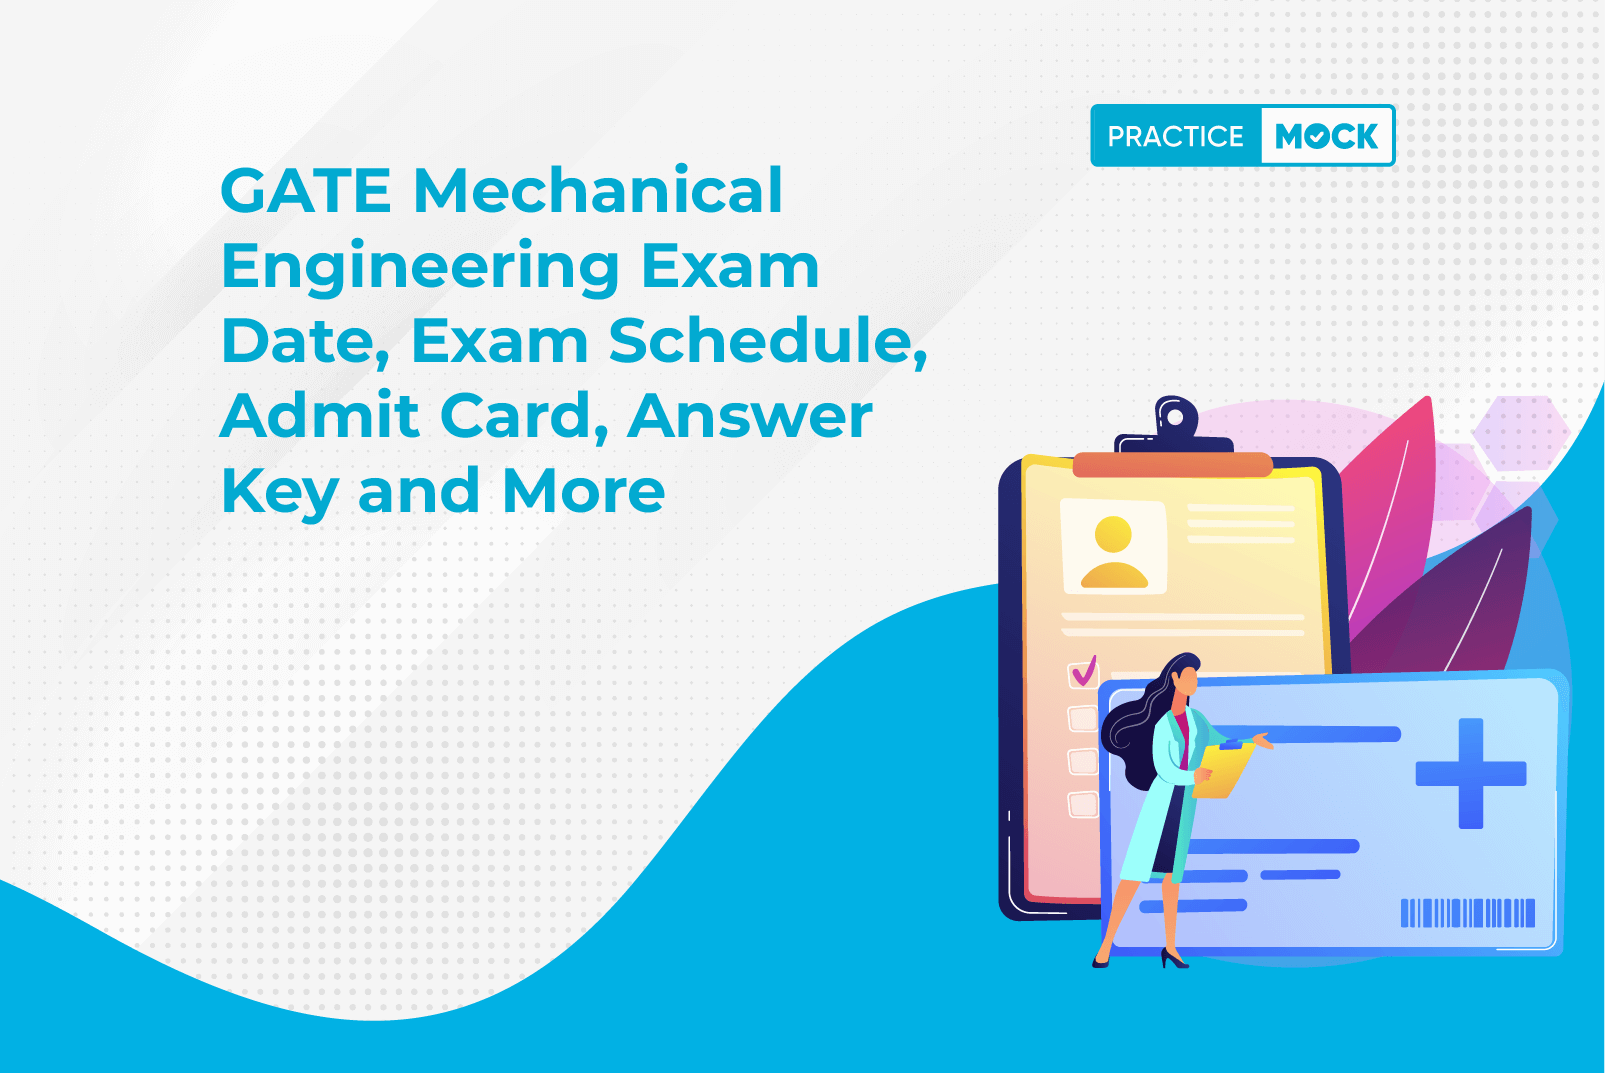 GATE Mechanical Engineering Exam Date, Exam Schedule, Admit Card, Answer Key and More